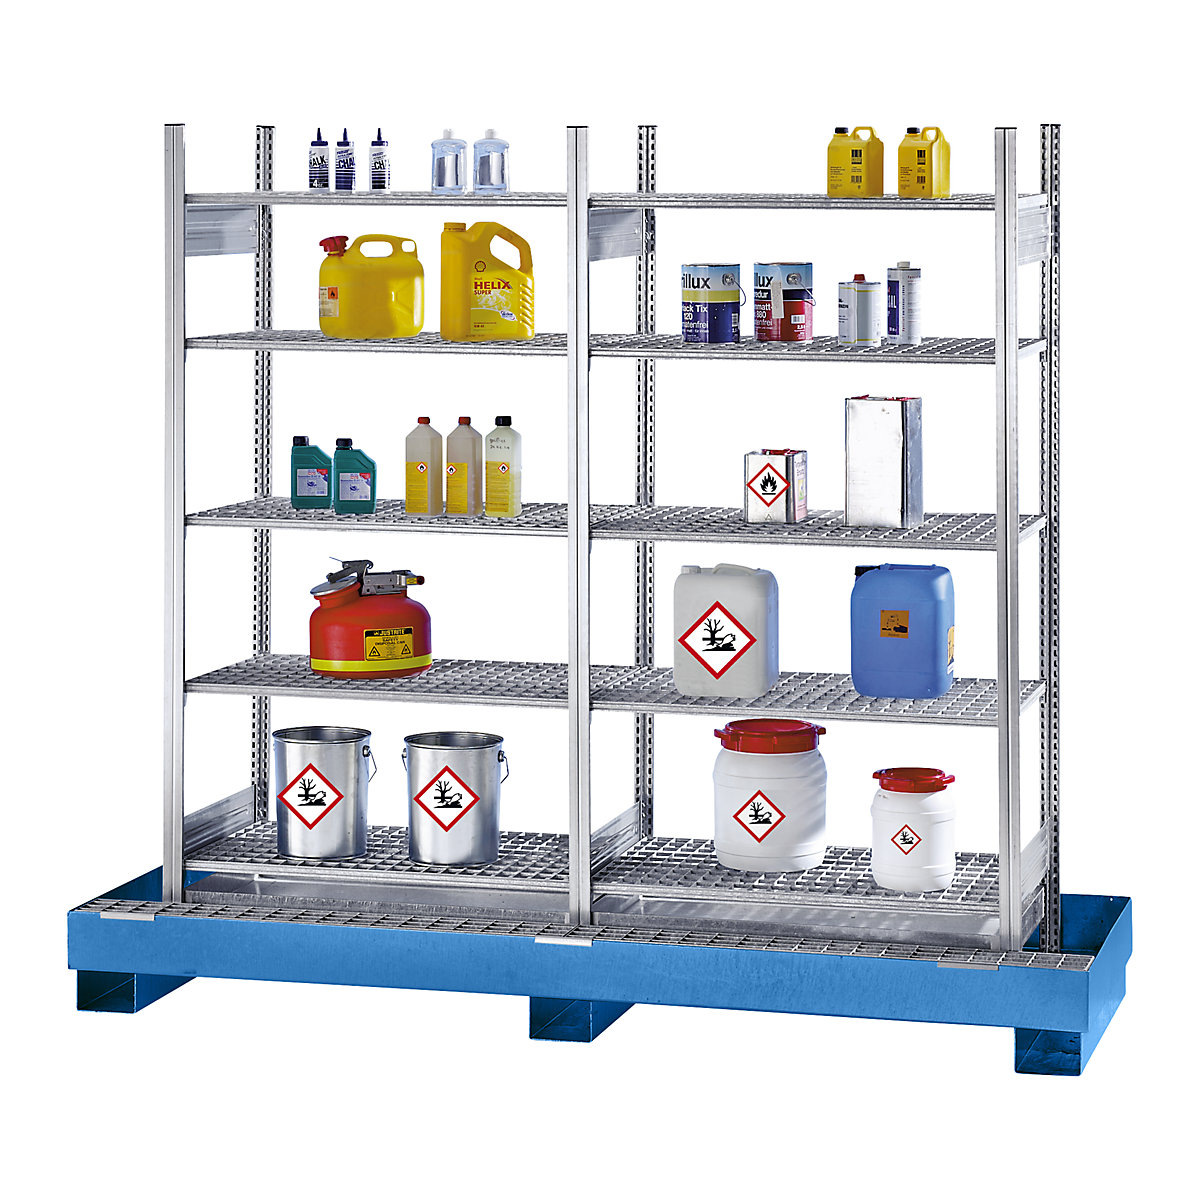 Hazardous goods shelving for small containers, for water hazardous and flammable media, 8 mesh shelves, 1 base sump tray, sump tray painted blue